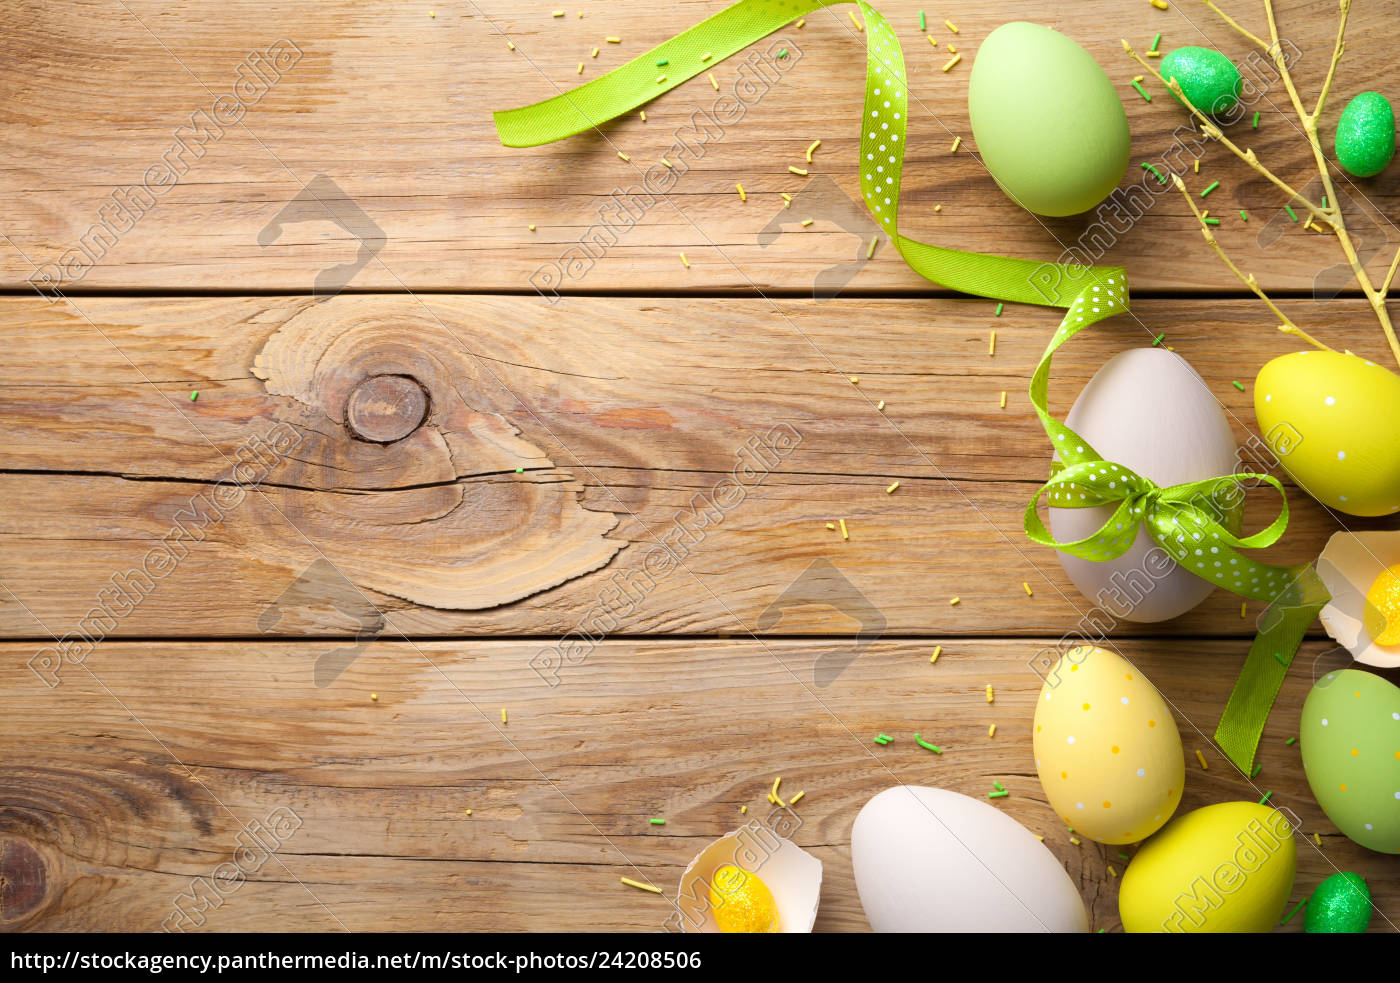 easter background with easter eggs - Royalty free image #24208506 |  PantherMedia Stock Agency